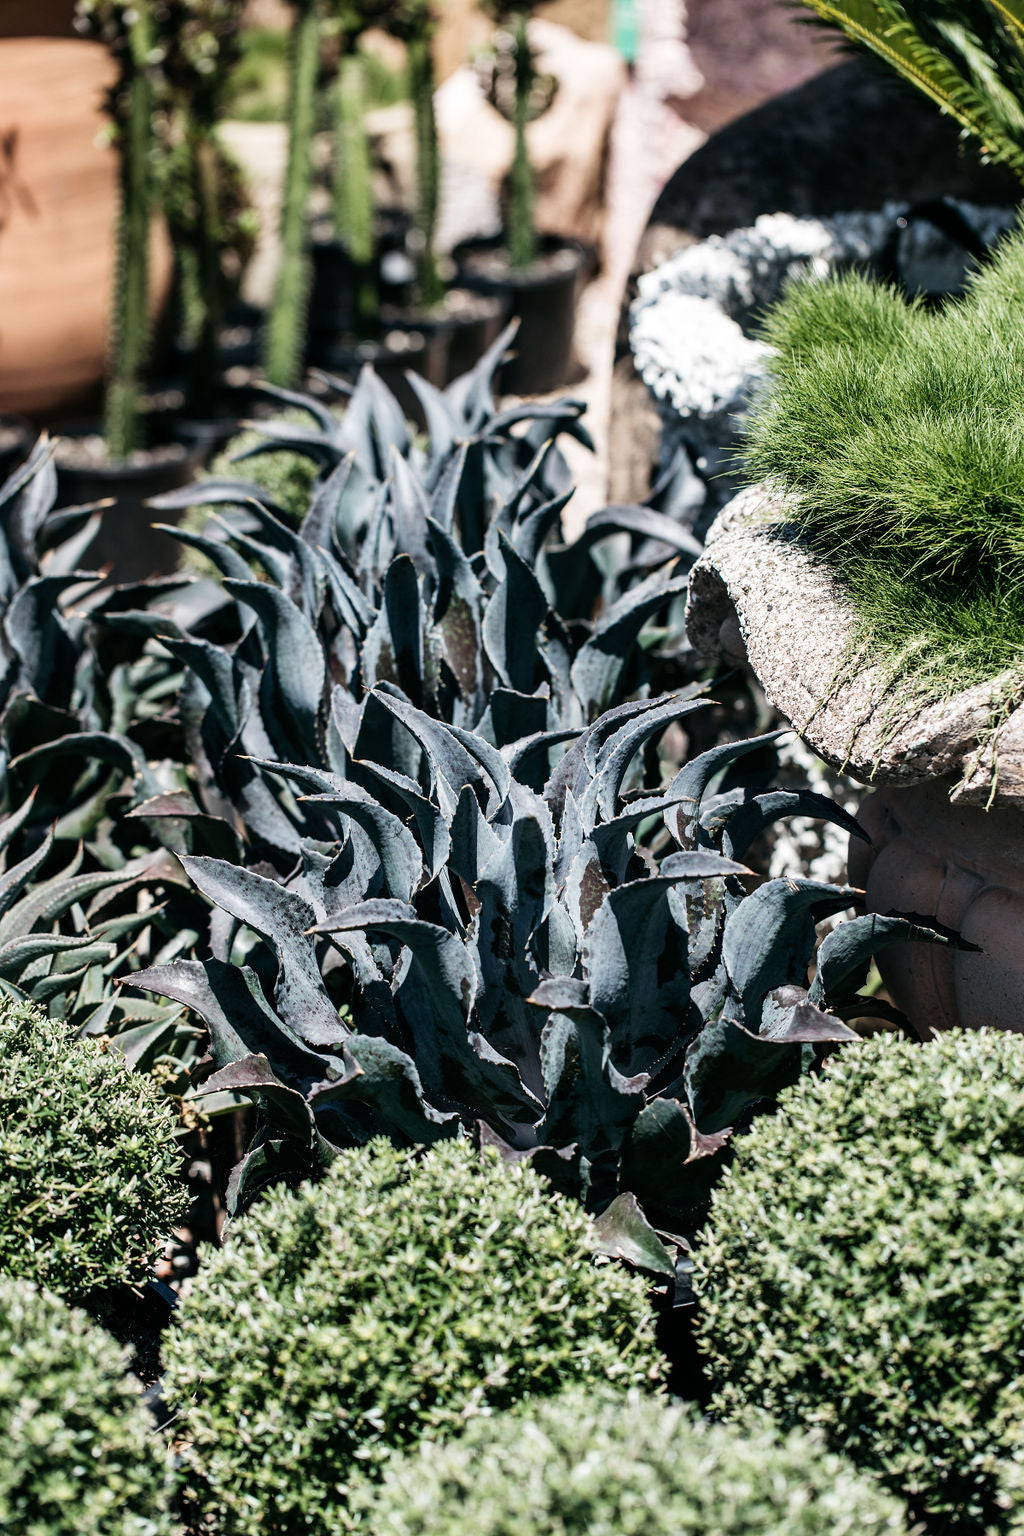 Black Spined Agave (Agave macroacantha)